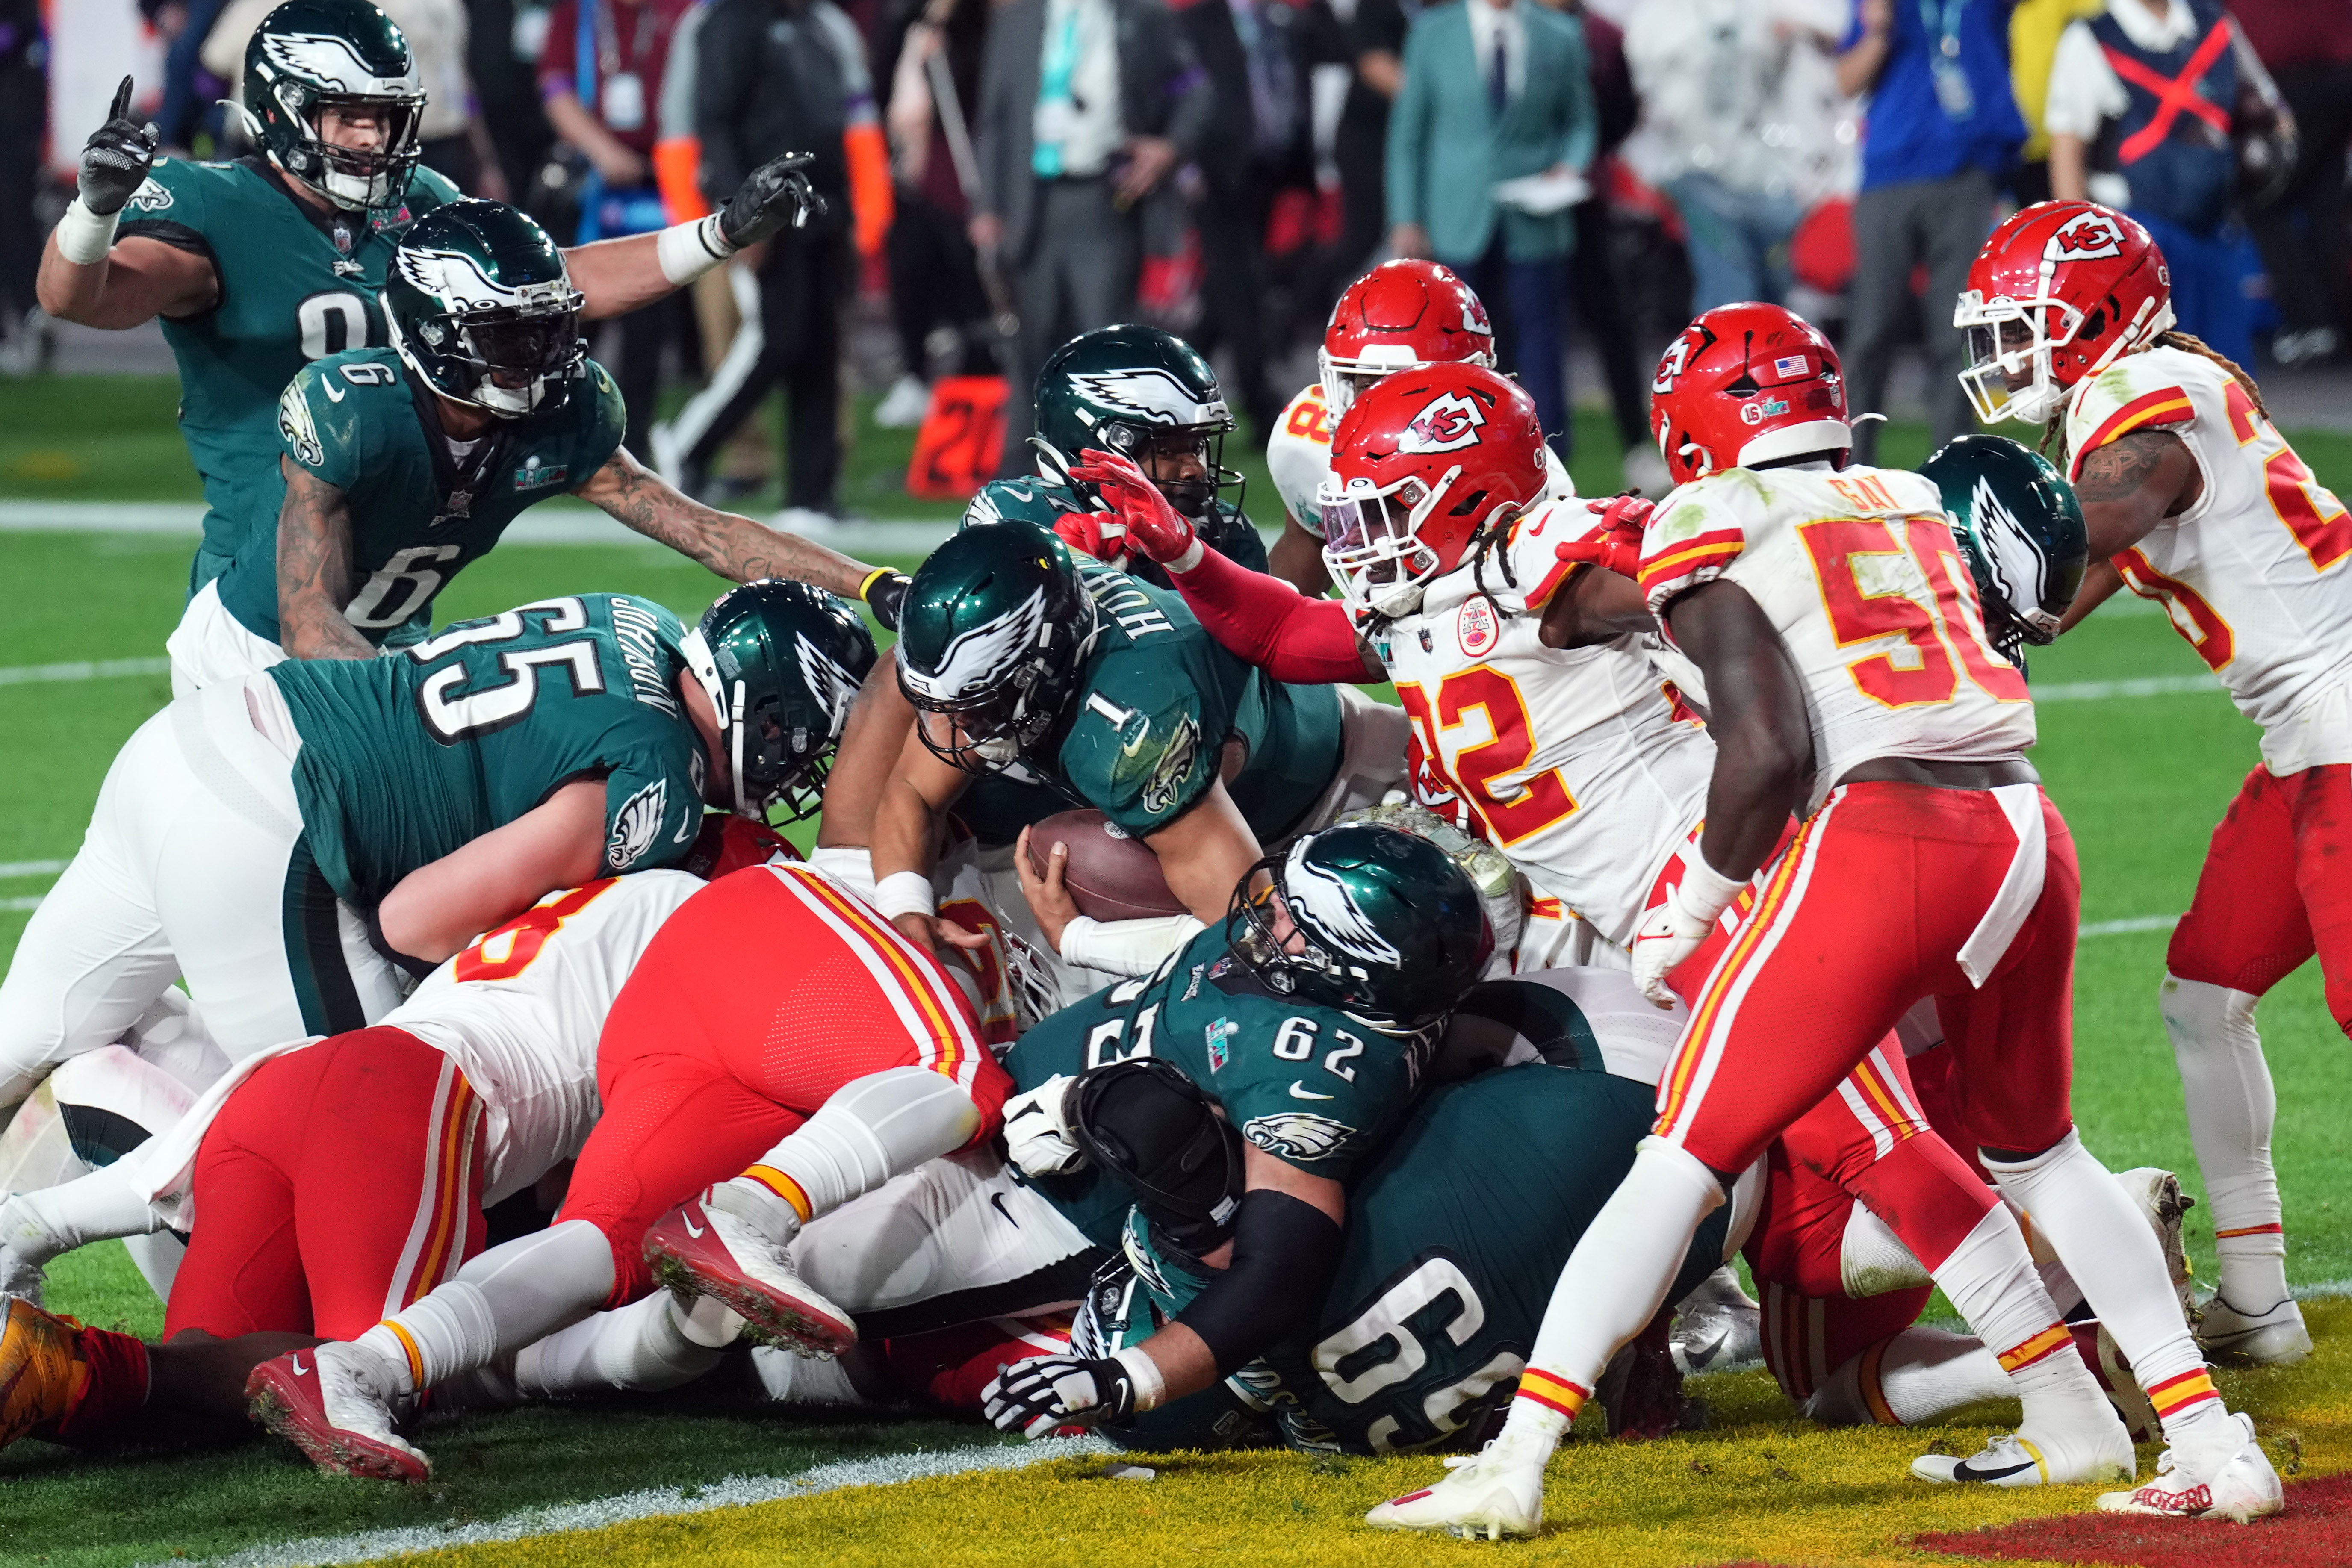 Jalen Hurts shoves himself on top of other Eagles players, while jason kelce lies on the ground and chiefs players rush to stop them